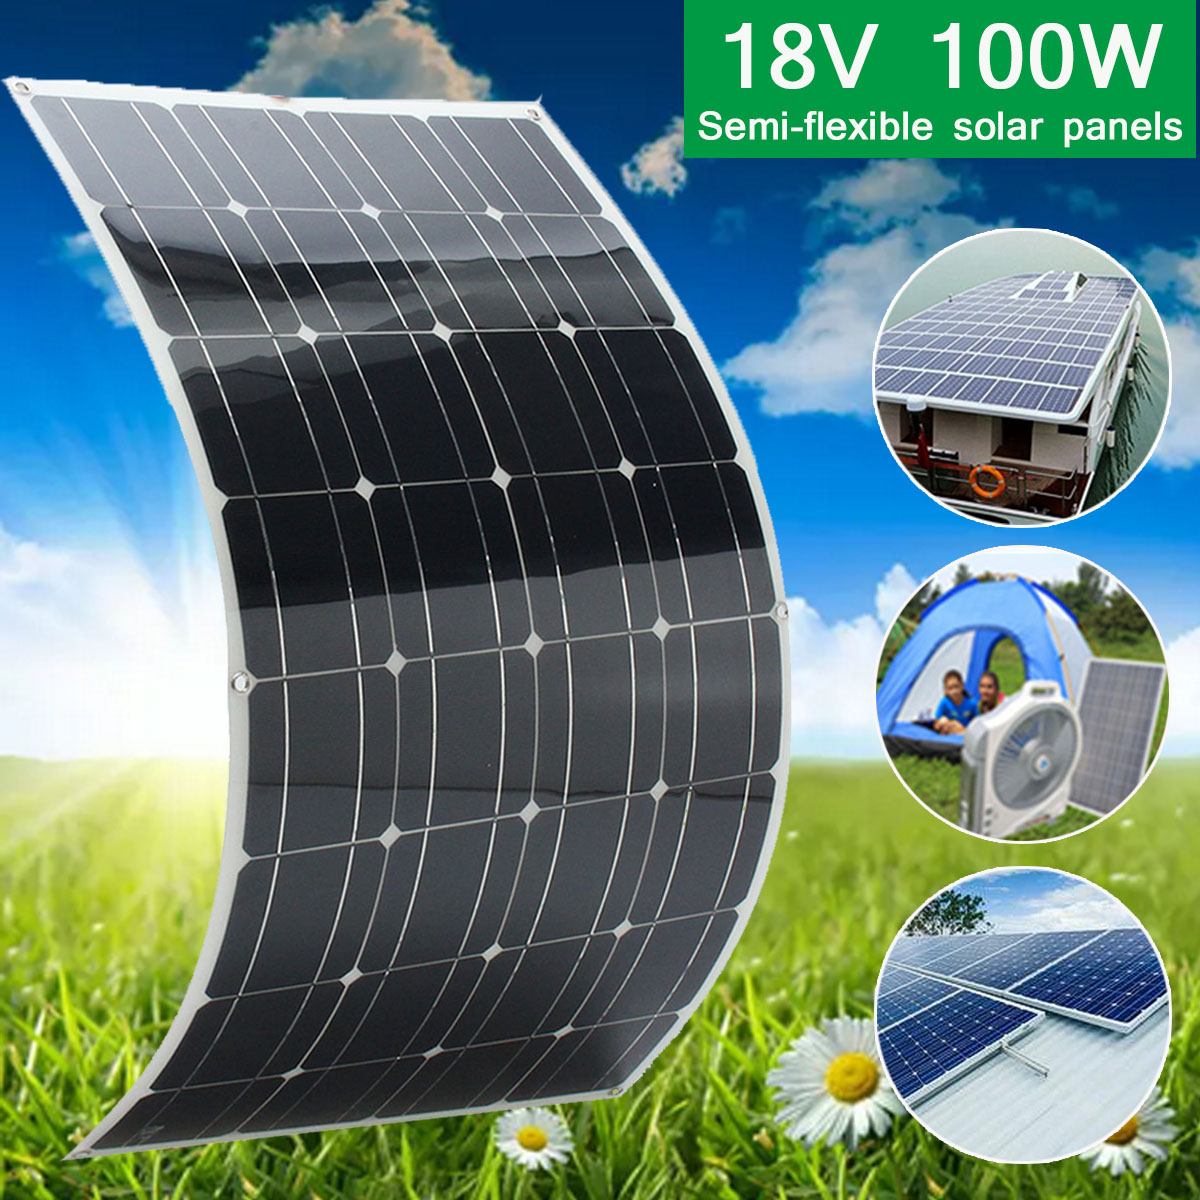 Elfeland® SP-38 18V 100W 1050x540x2.5mm Flexible Solar Panel With 1.5m Cable 11